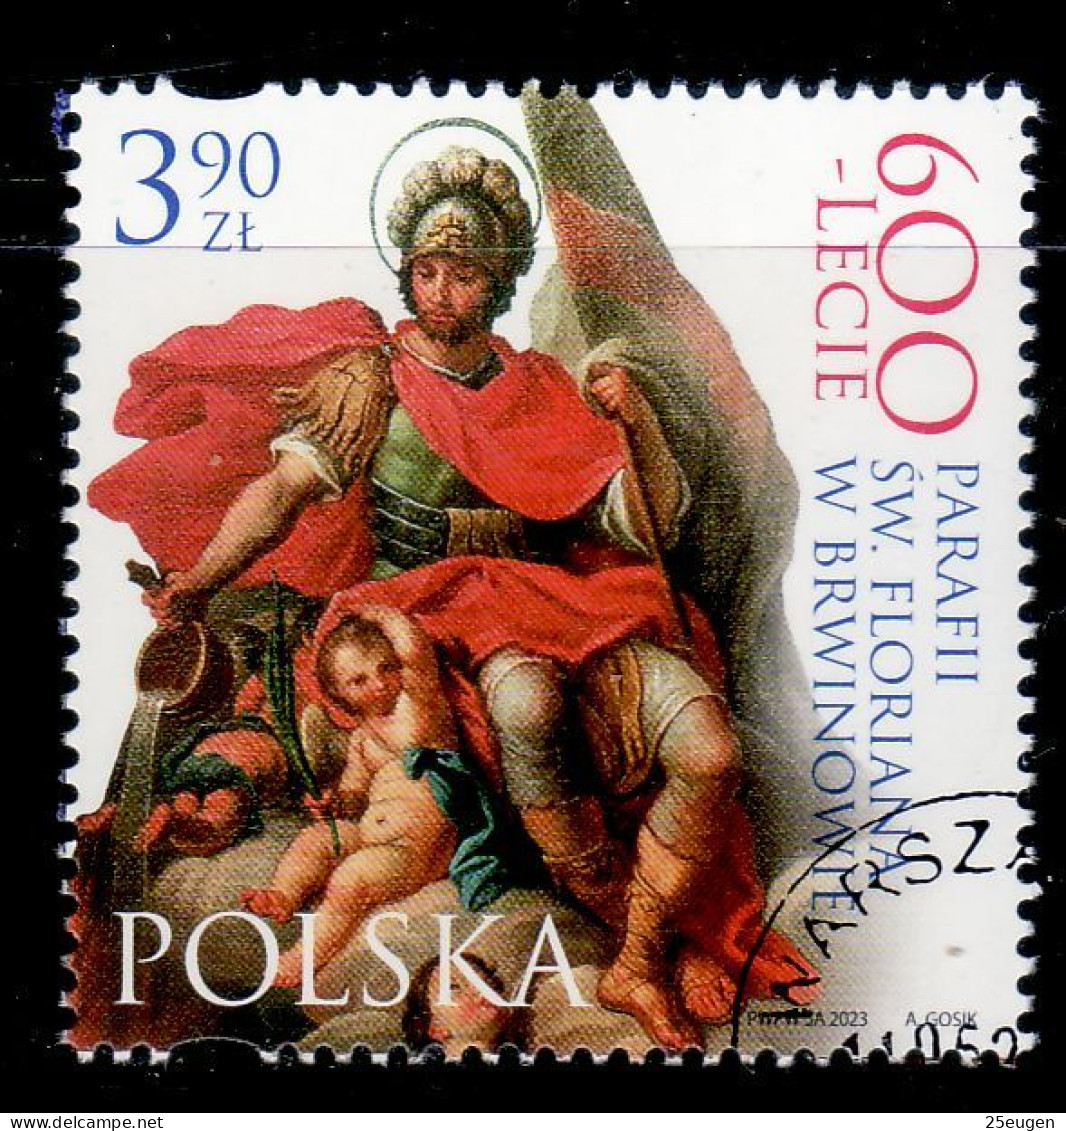 POLAND 2023  600th Anniversary Of The Parish Of St. Florian In Brwinów  USED - Usati